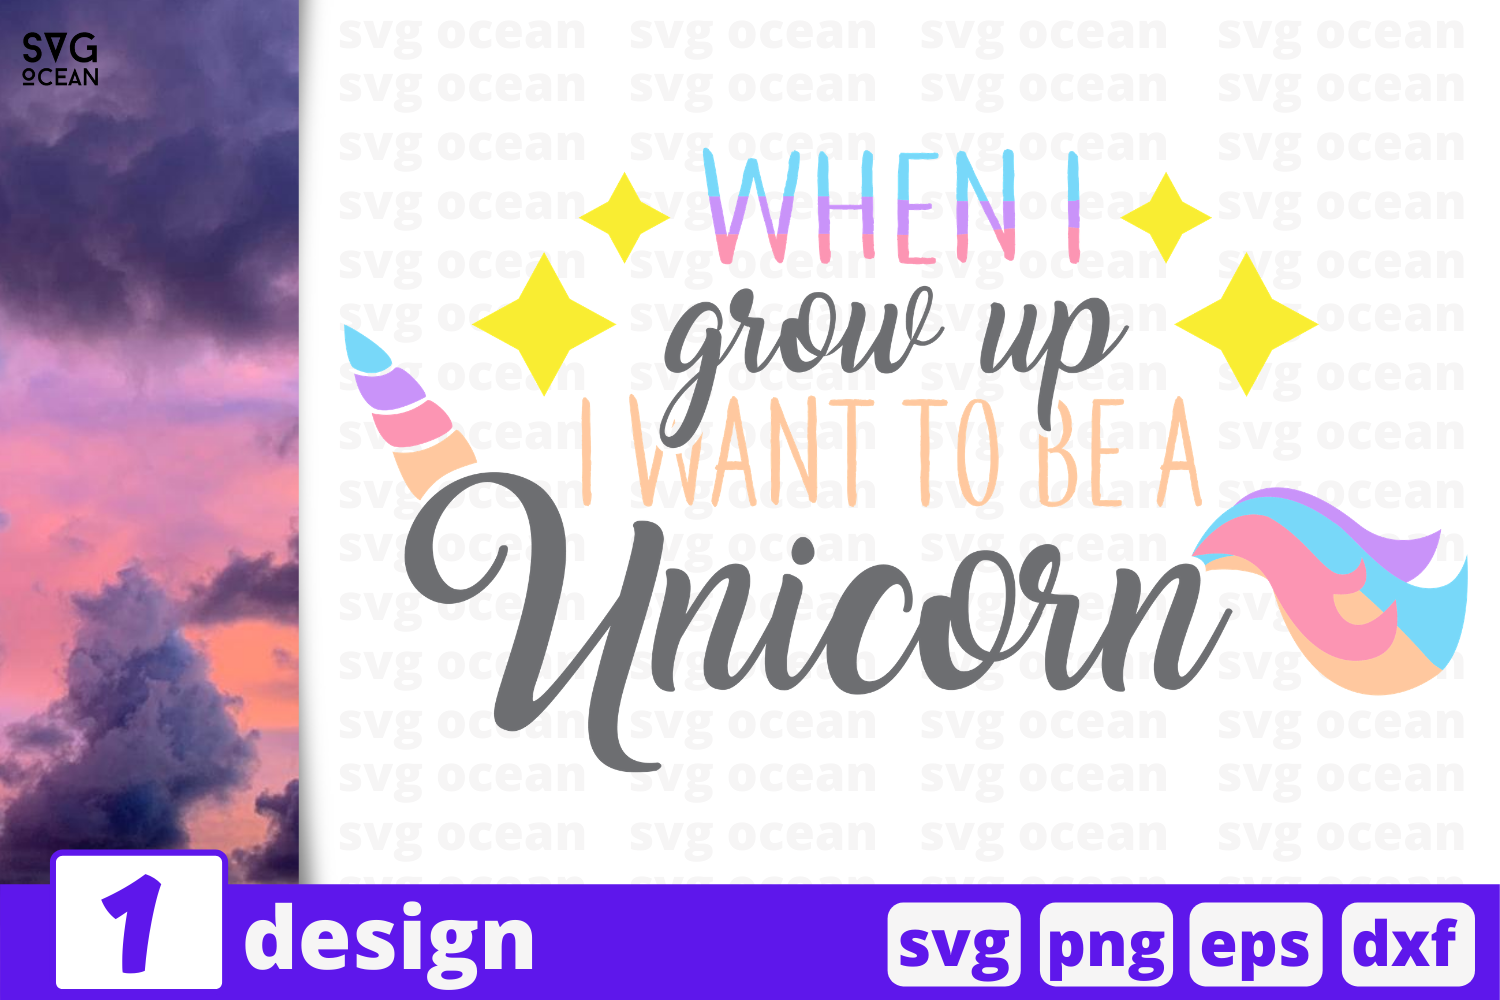 Download 1 WHEN I GROW UP I WANT TO BE A UNICORN, Unicorn quotes ...